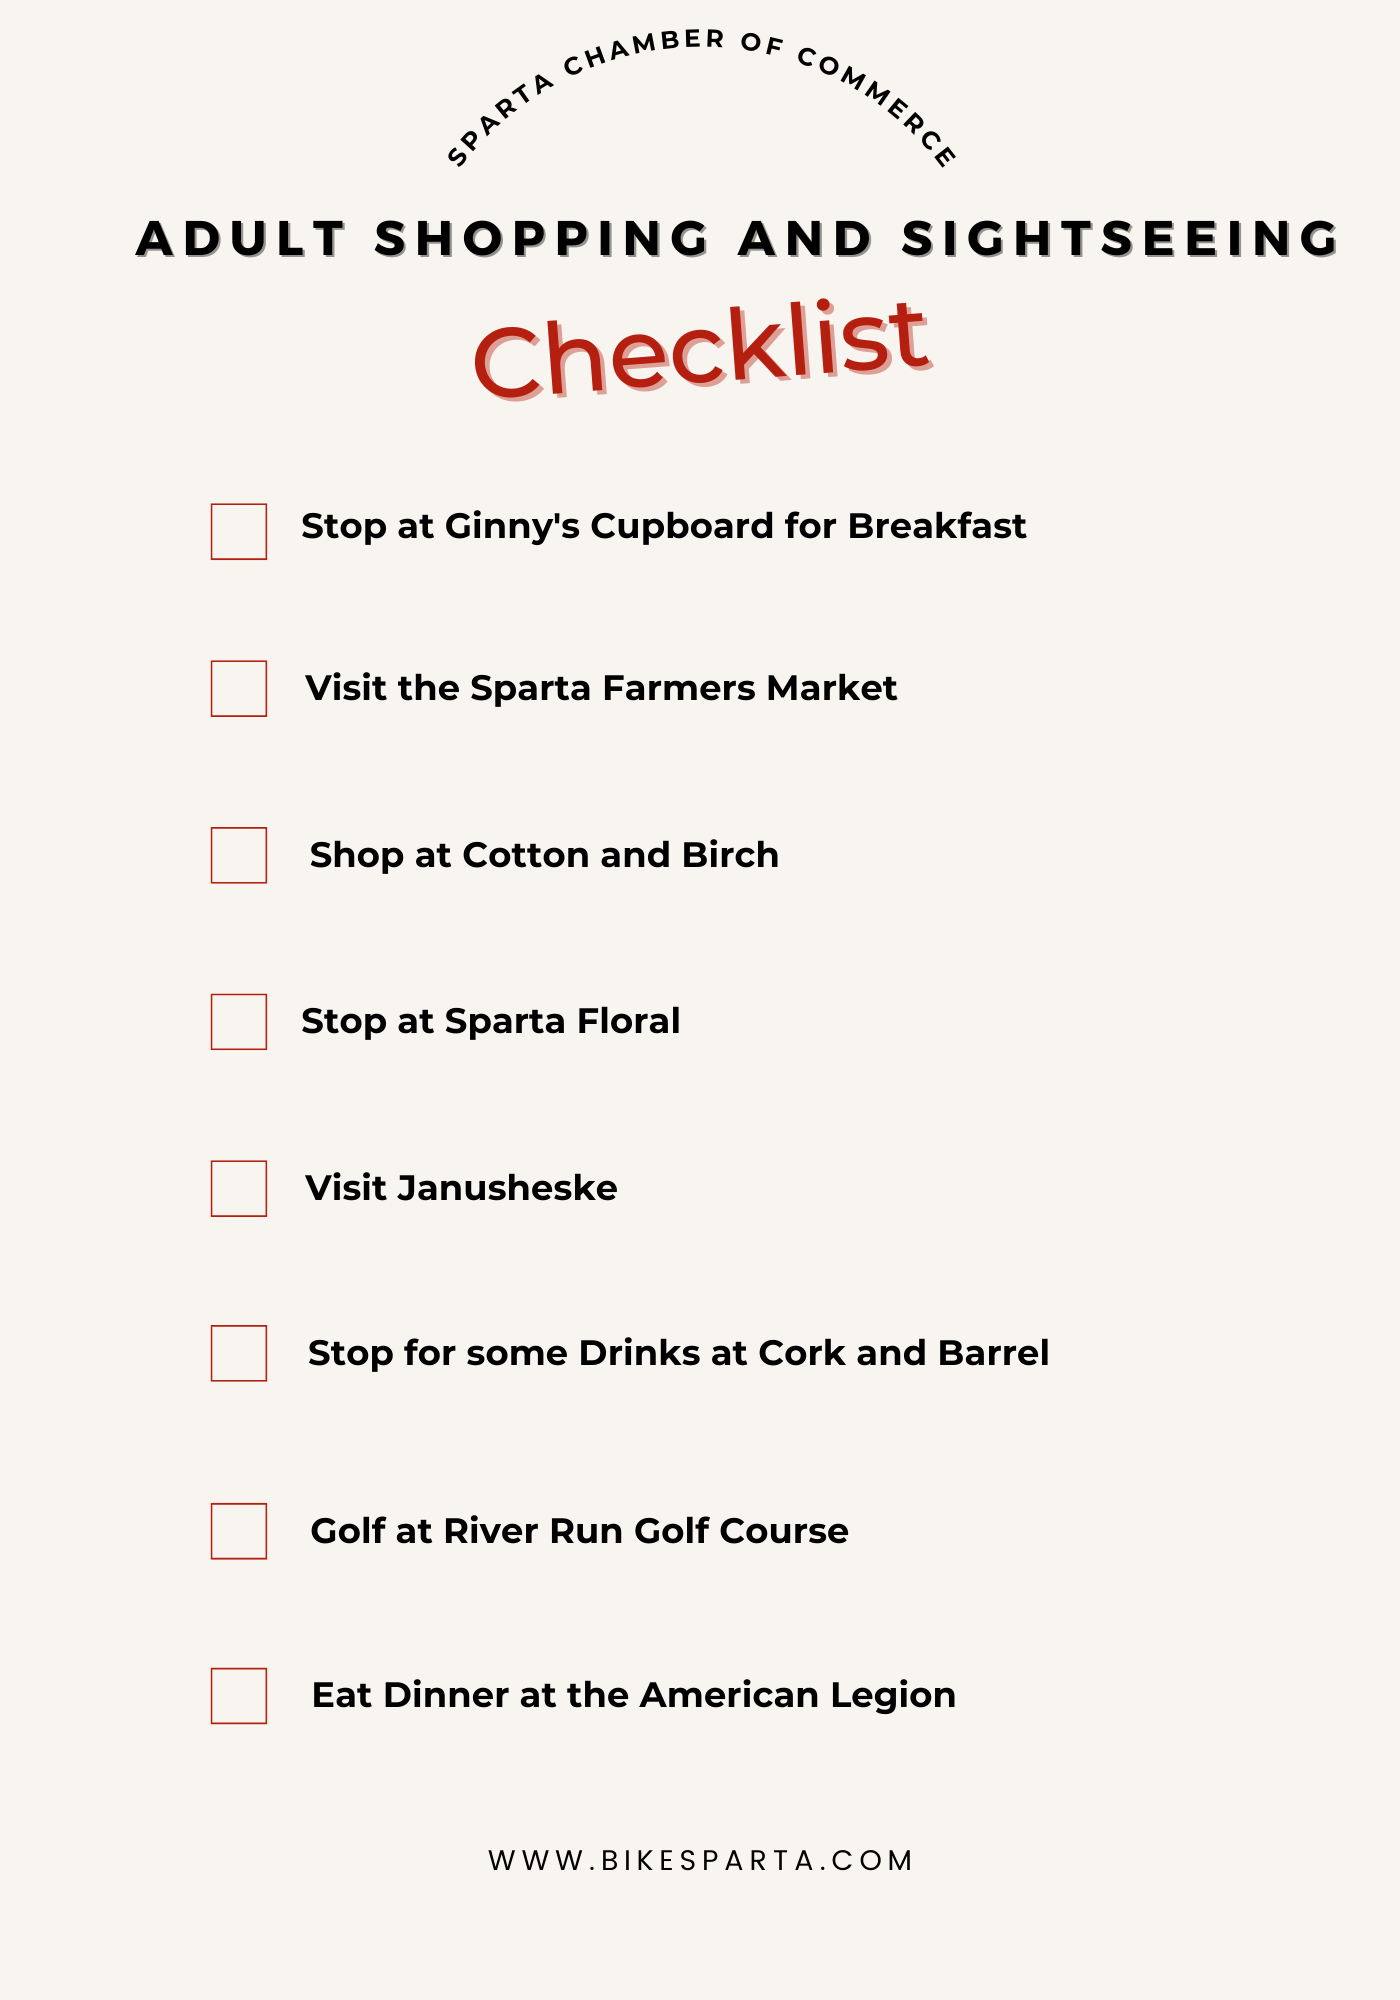 Shopping and Sightseeing checklist